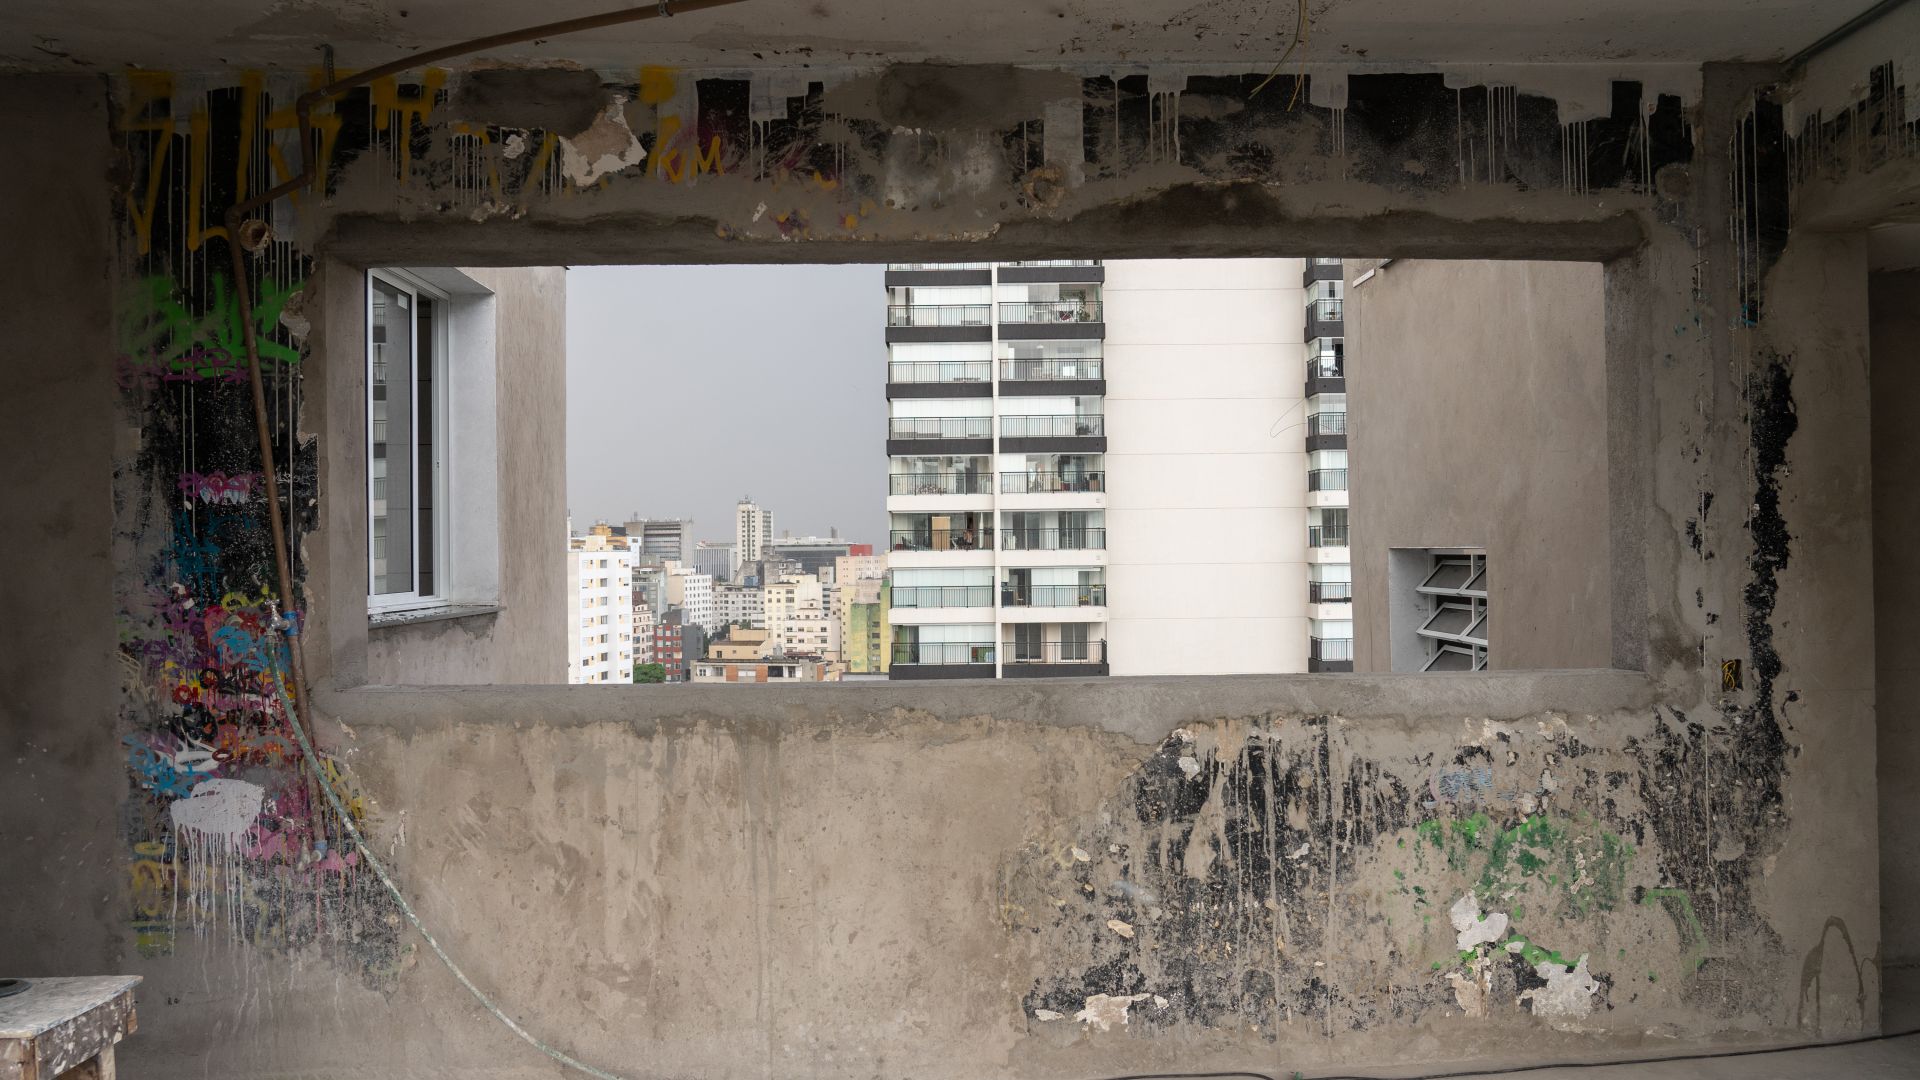 Remnants of graffiti painted during the occupation are seen against the backdrop of the city